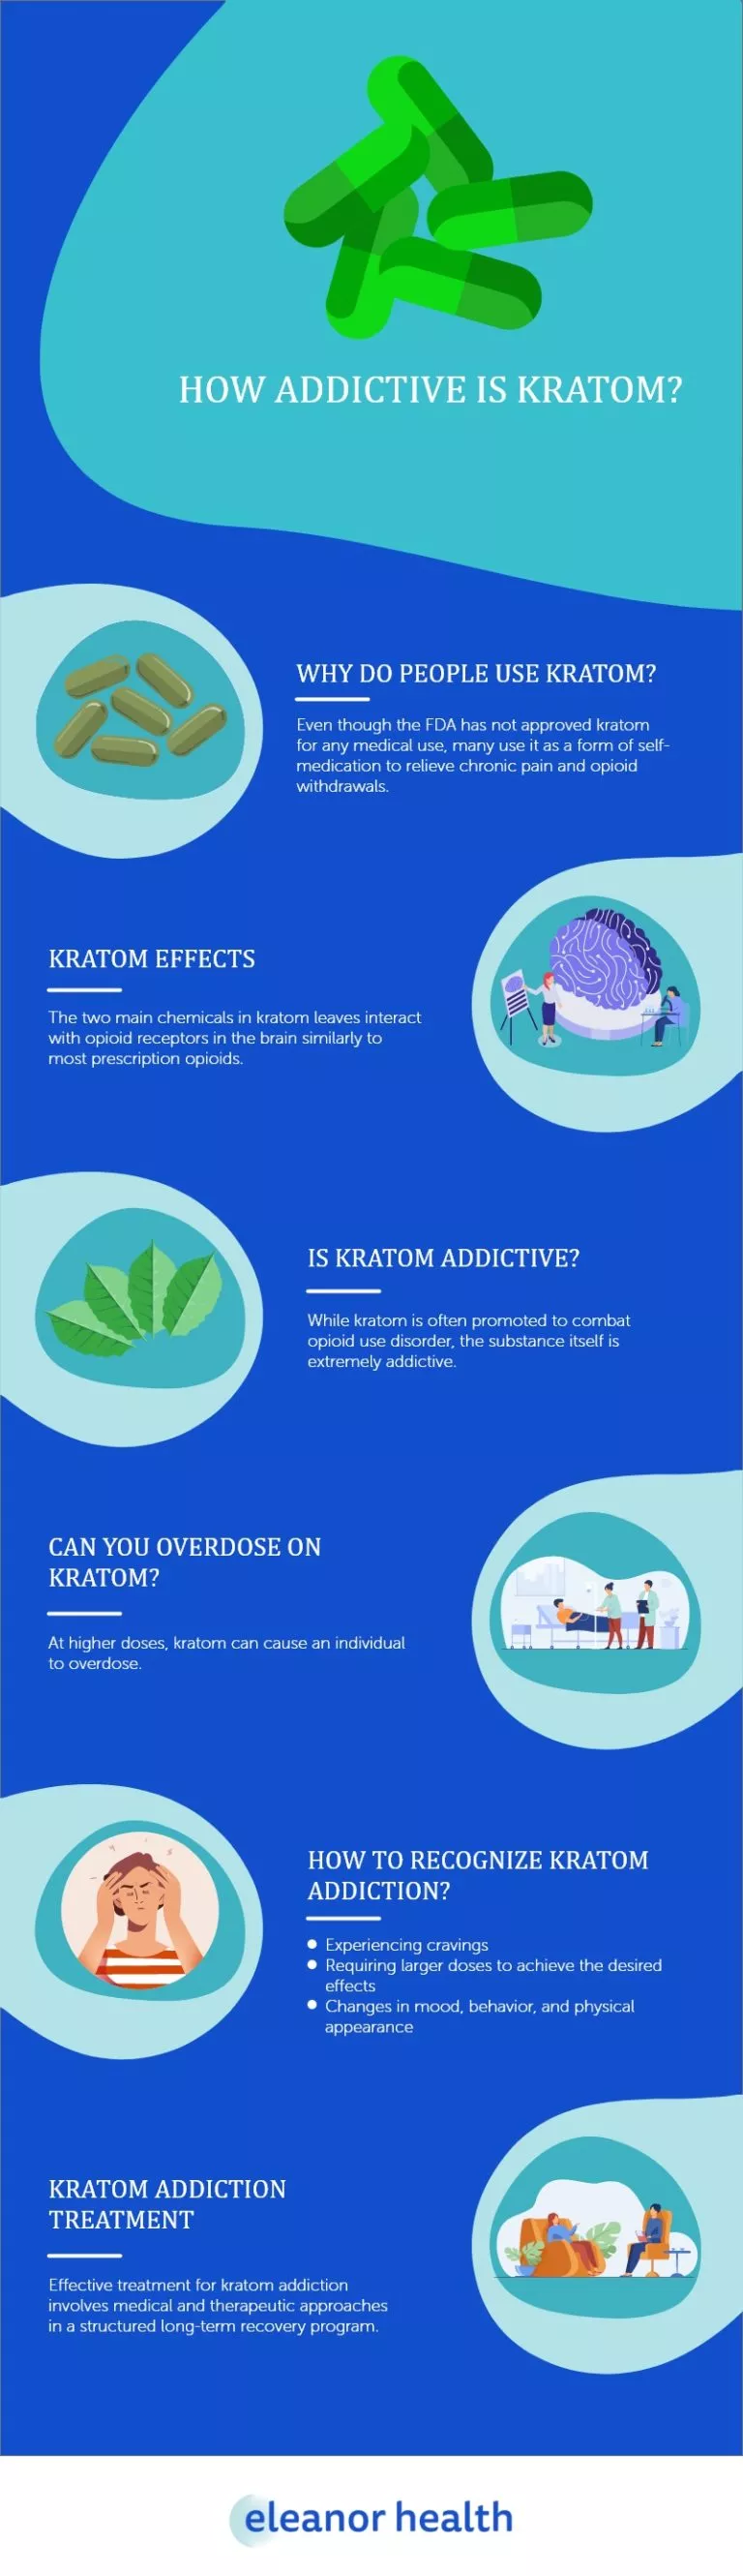 How Long Does It Take to Get Addicted to Kratom?